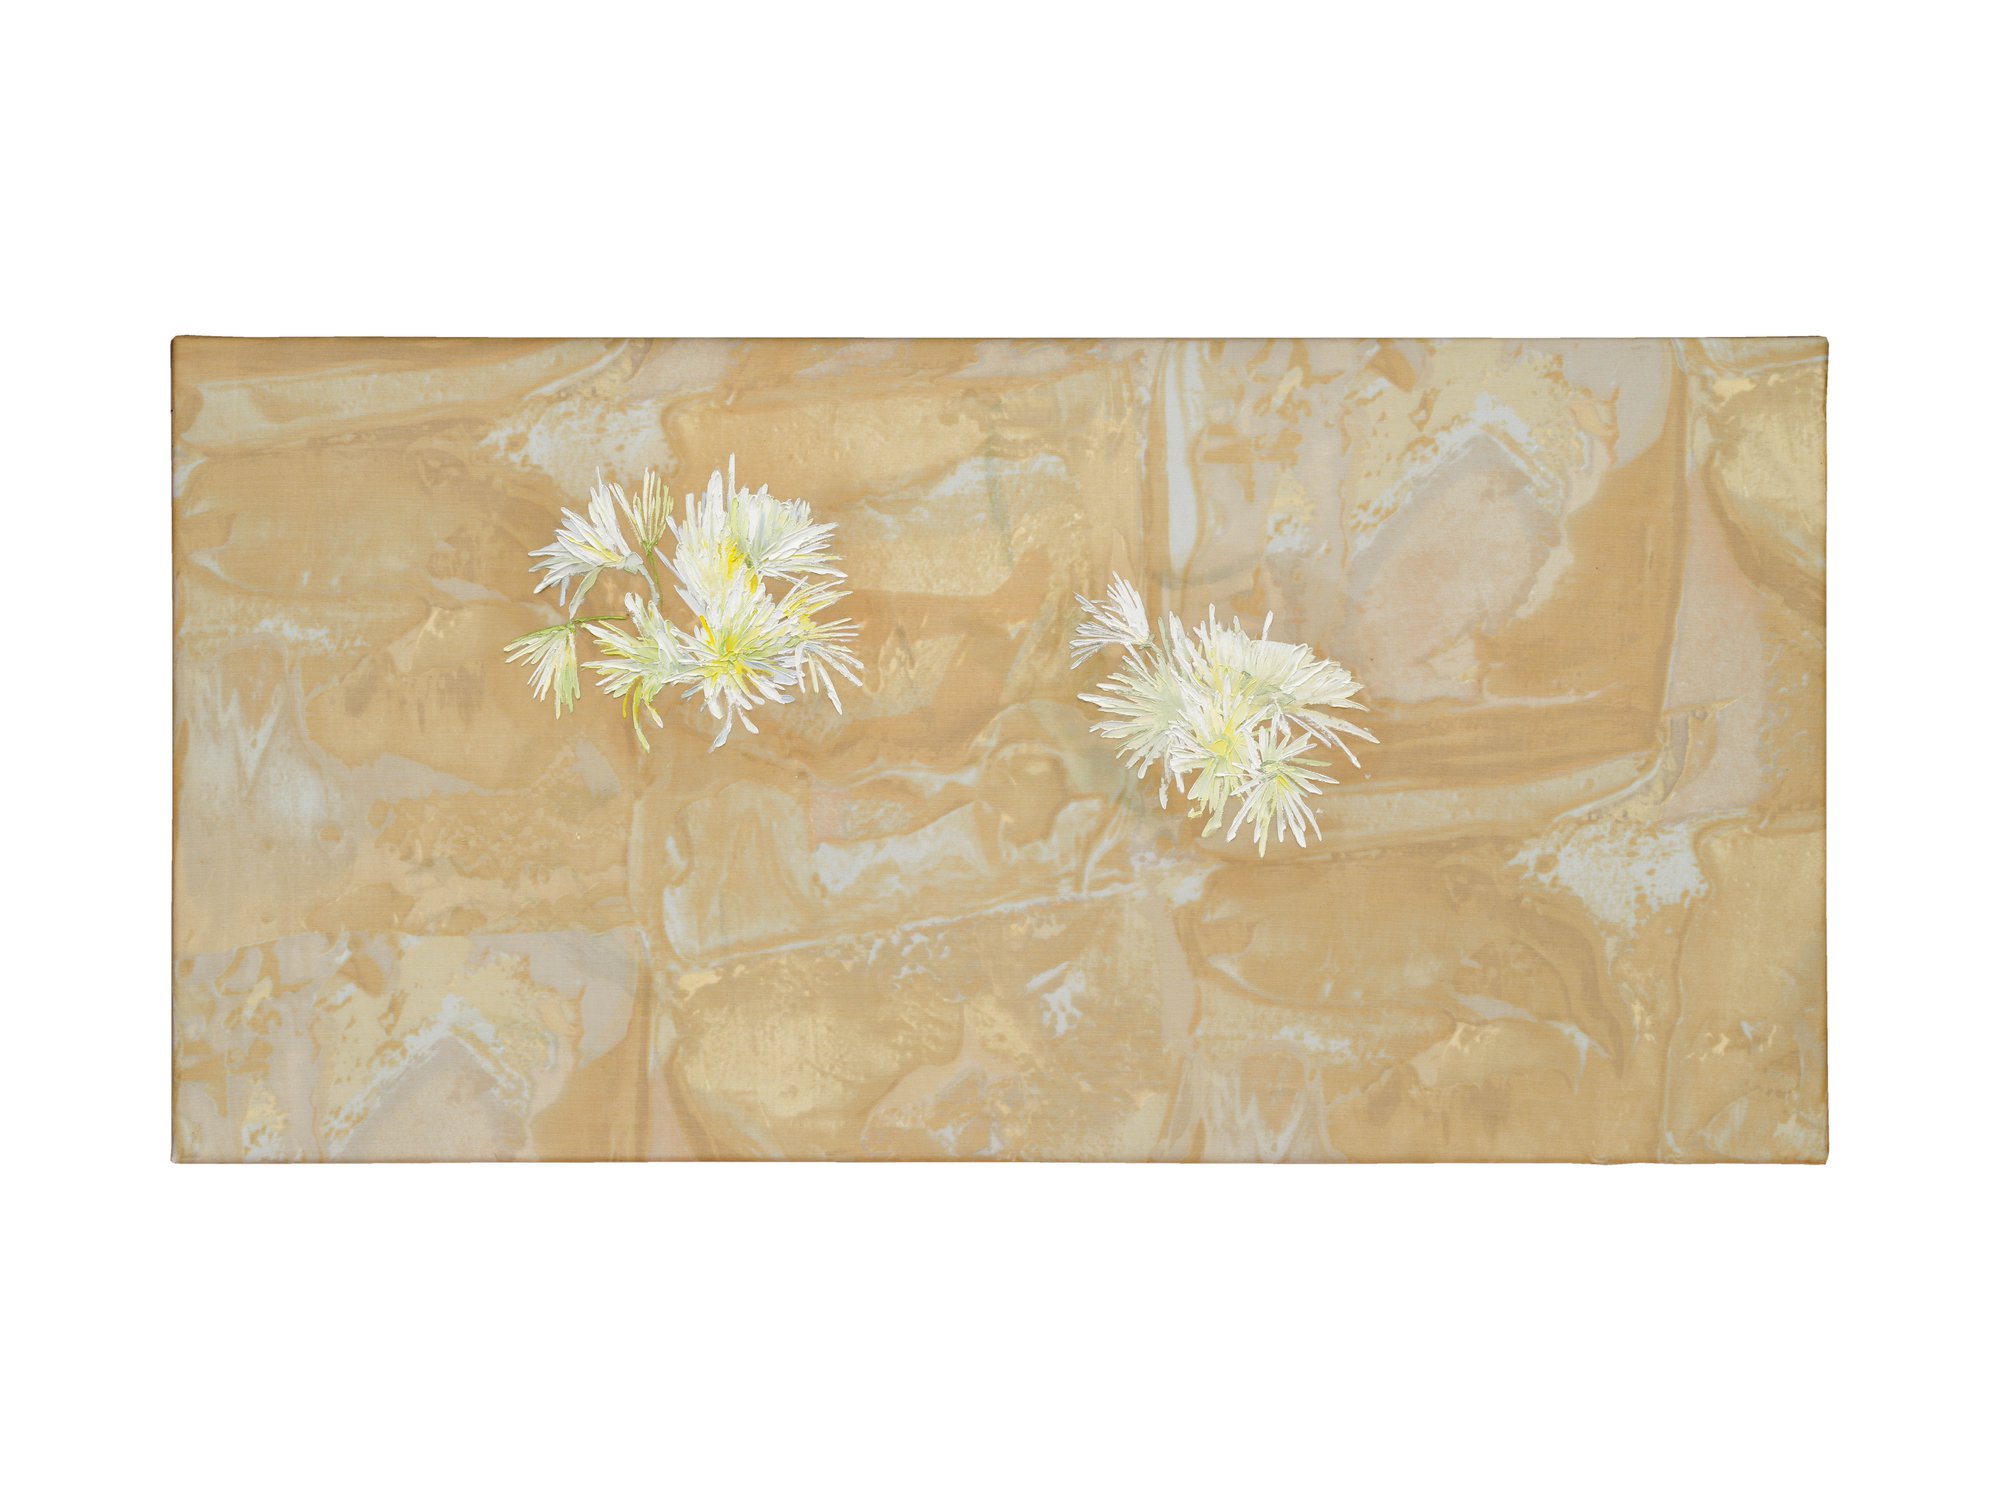 Bernat Klein, Chrysanthemums (spider), oil on screen printed knitted jersey polyester (Diolen), 55.5 x 106 cm (21 7/8 x 41 3/4 in), 1998